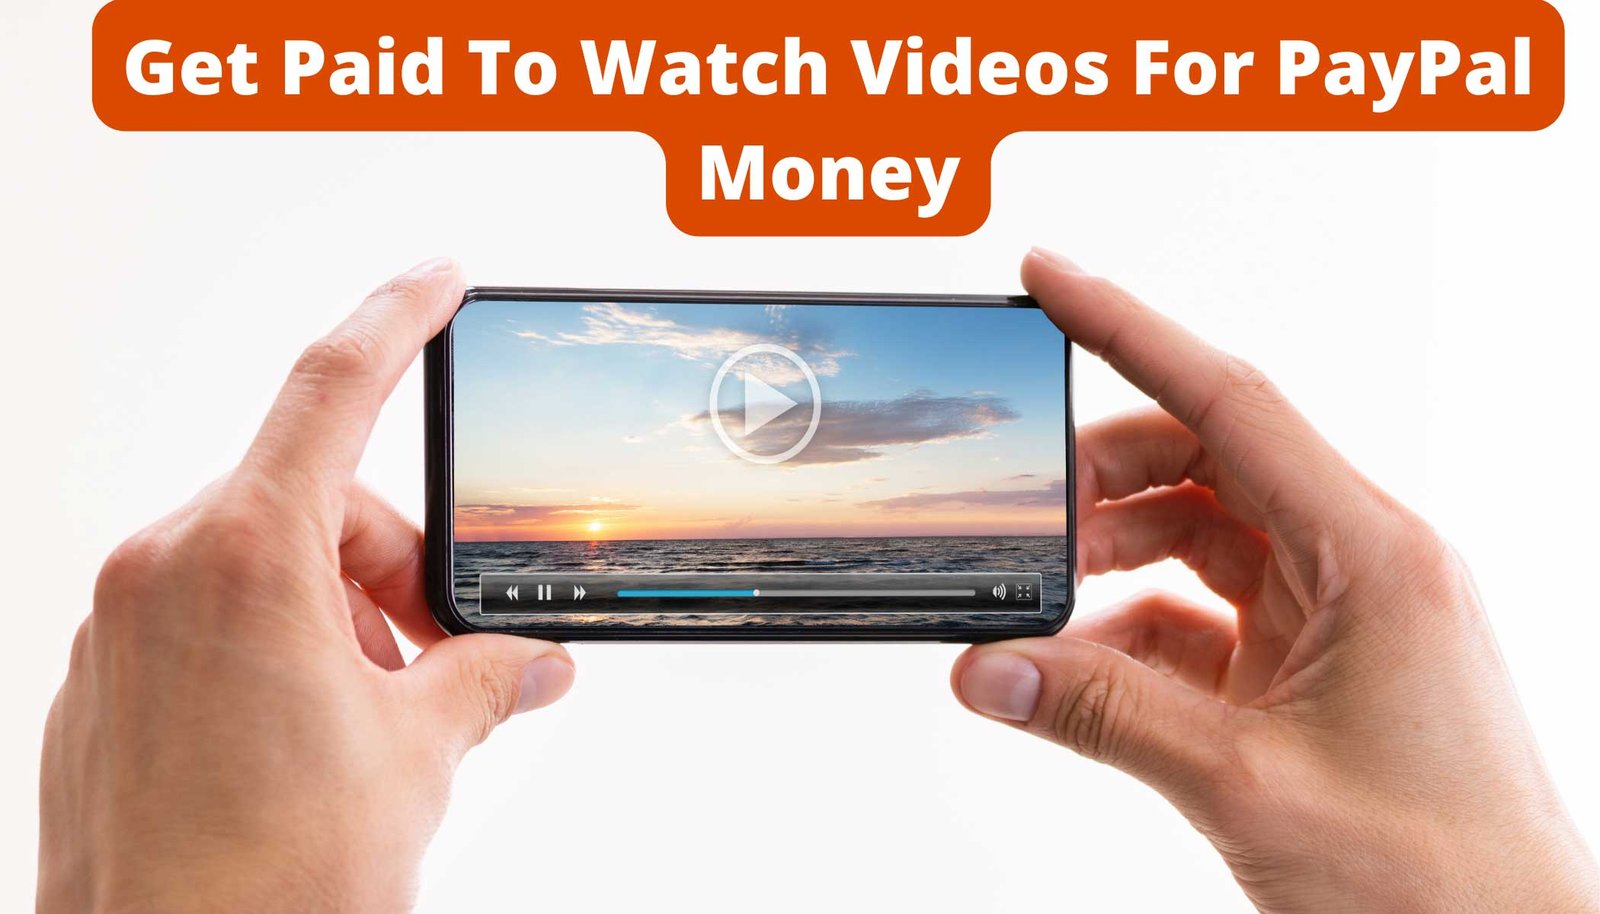 Get-Paid-To-Watch-Videos-For-Paypal-Money-Sproutmentor